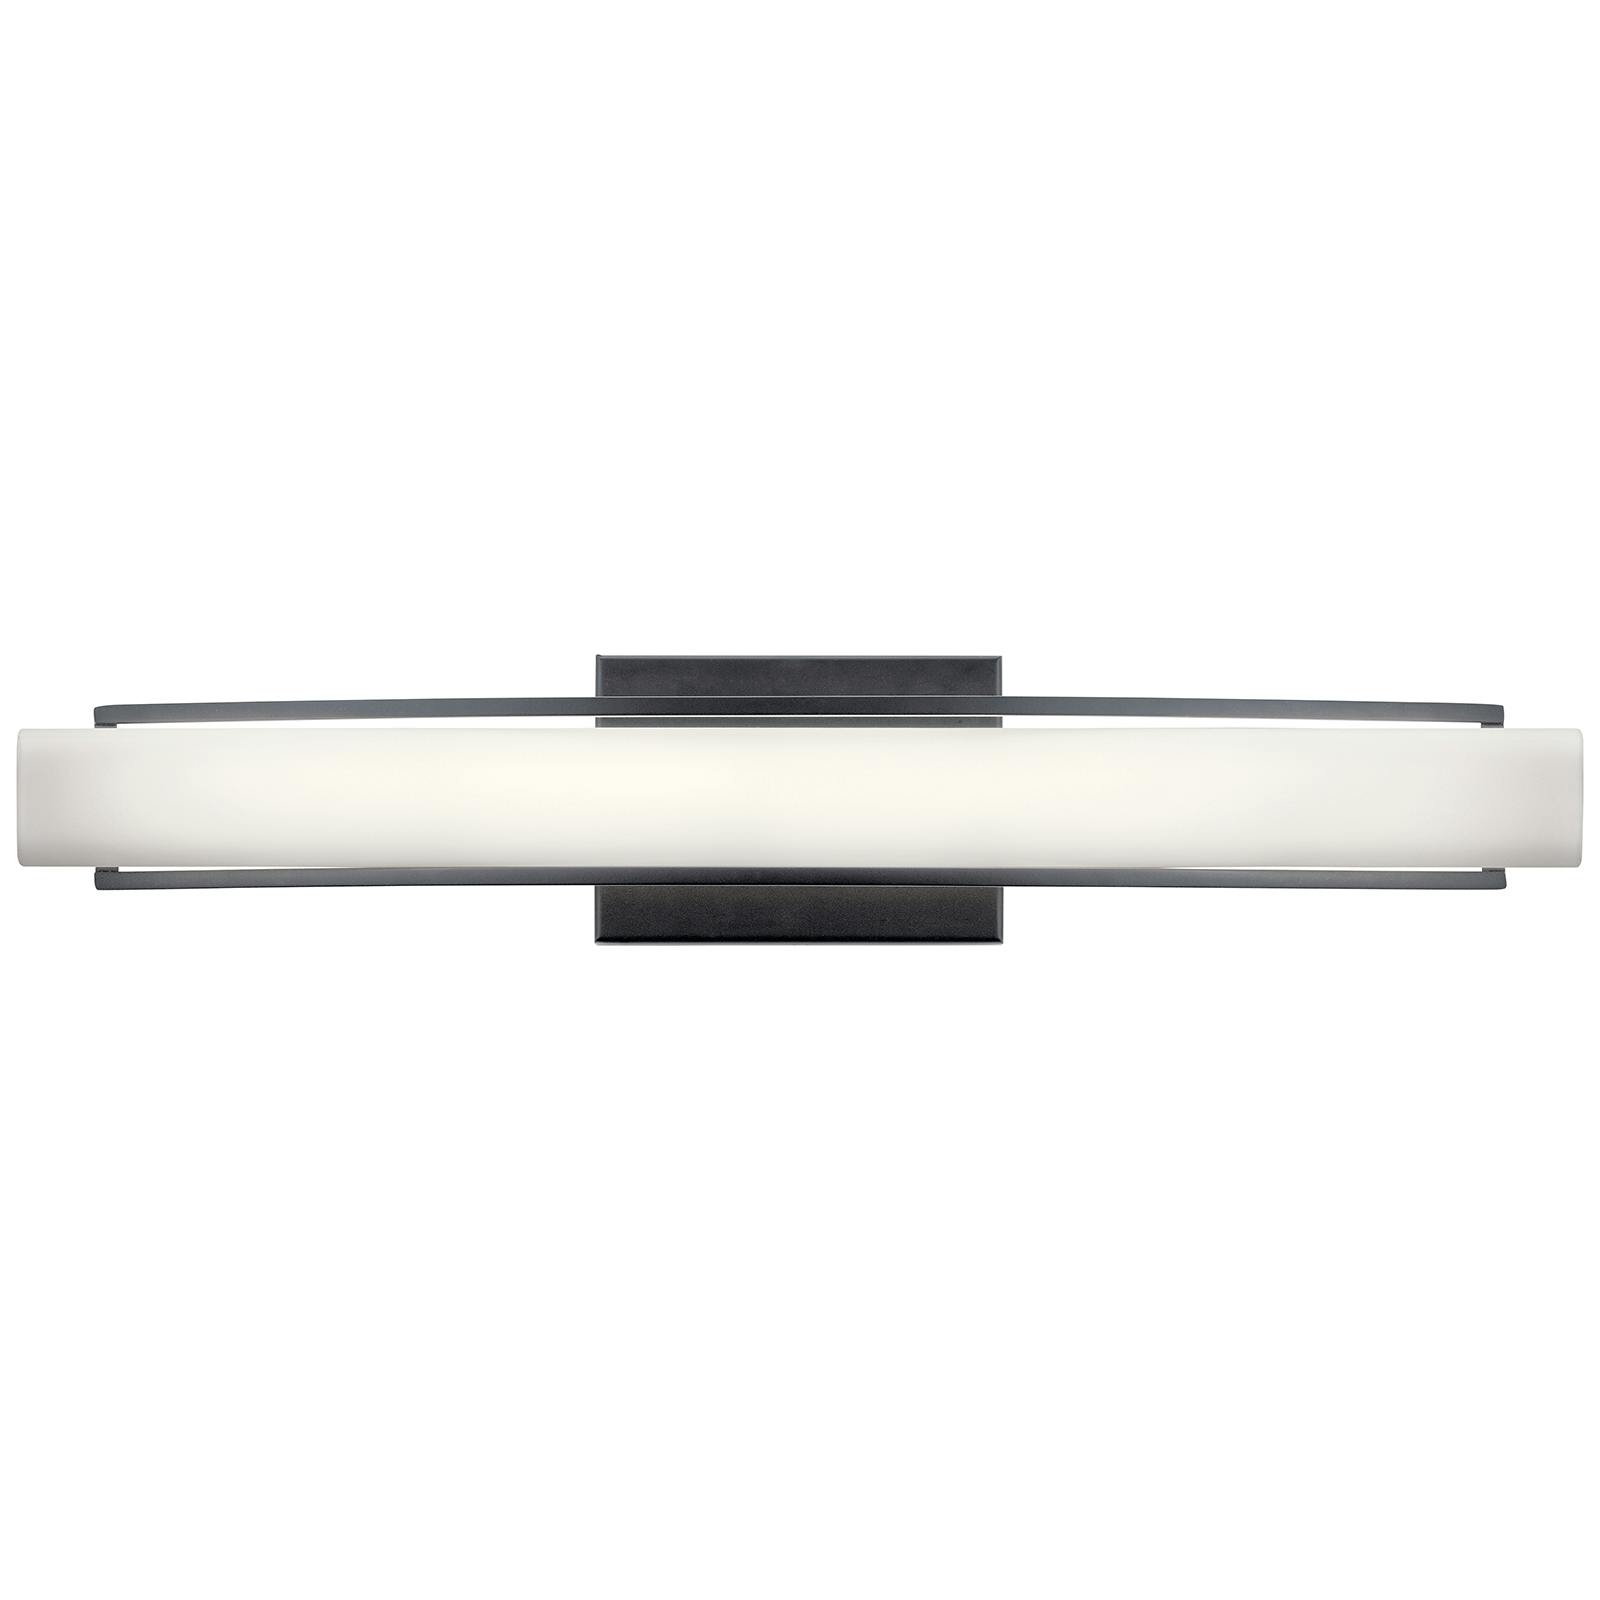 Front view of the Rowan 25.25" LED Vanity Light Black on a white background